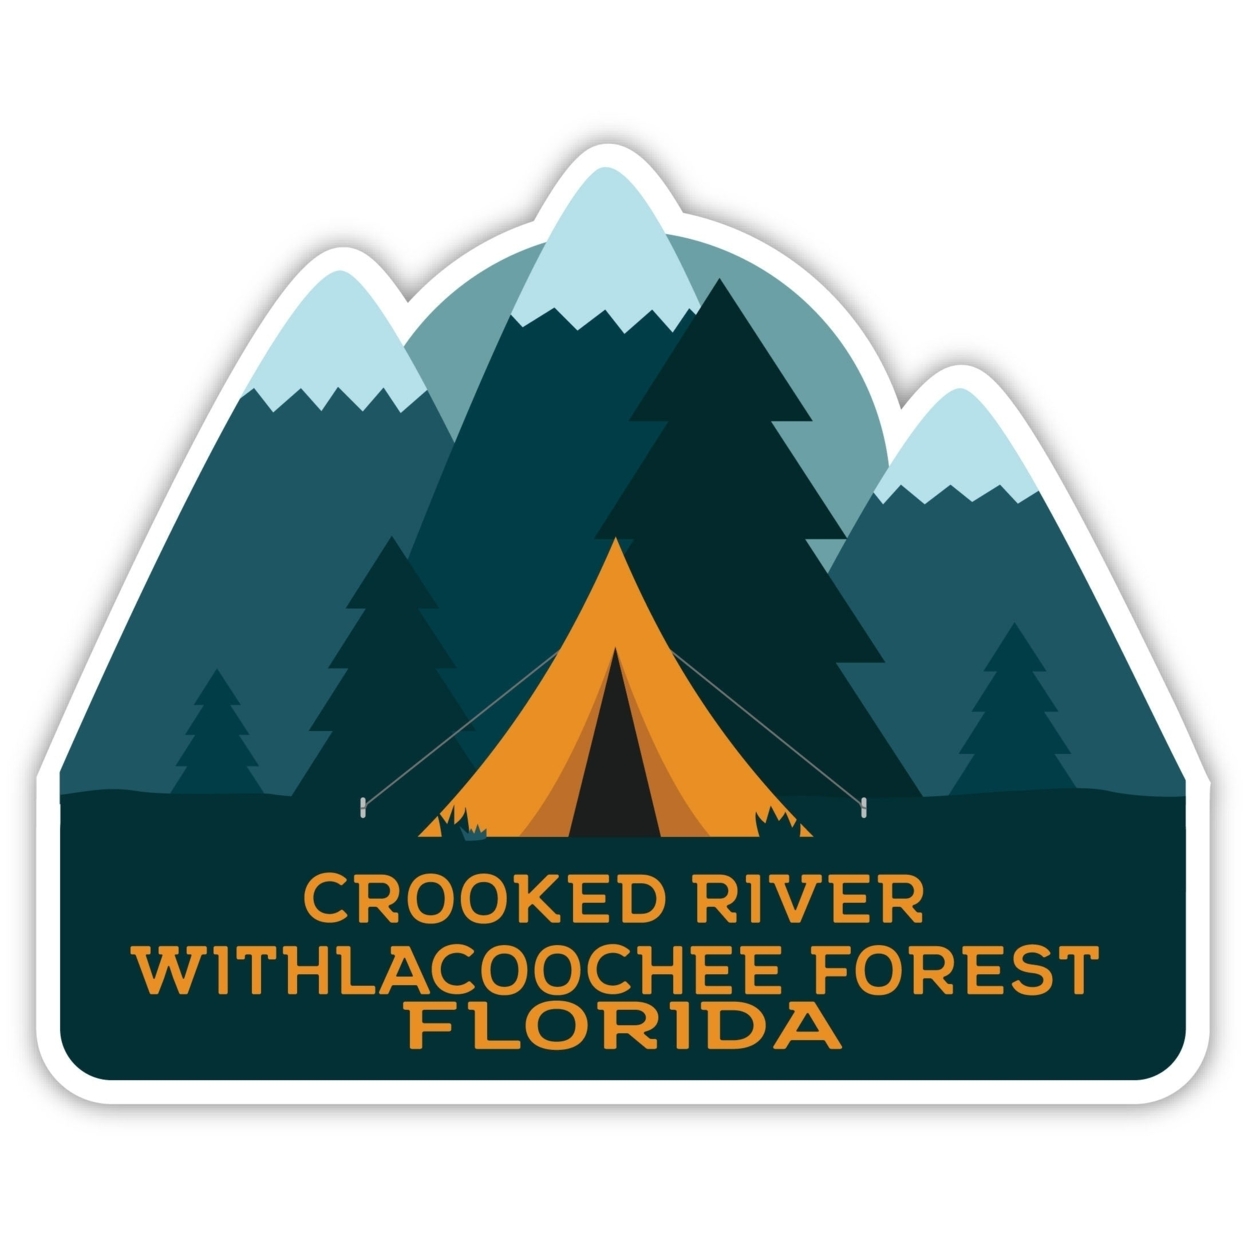 Crooked River Withlacoochee Forest Florida Souvenir Decorative Stickers (Choose Theme And Size) - 4-Pack, 8-Inch, Tent